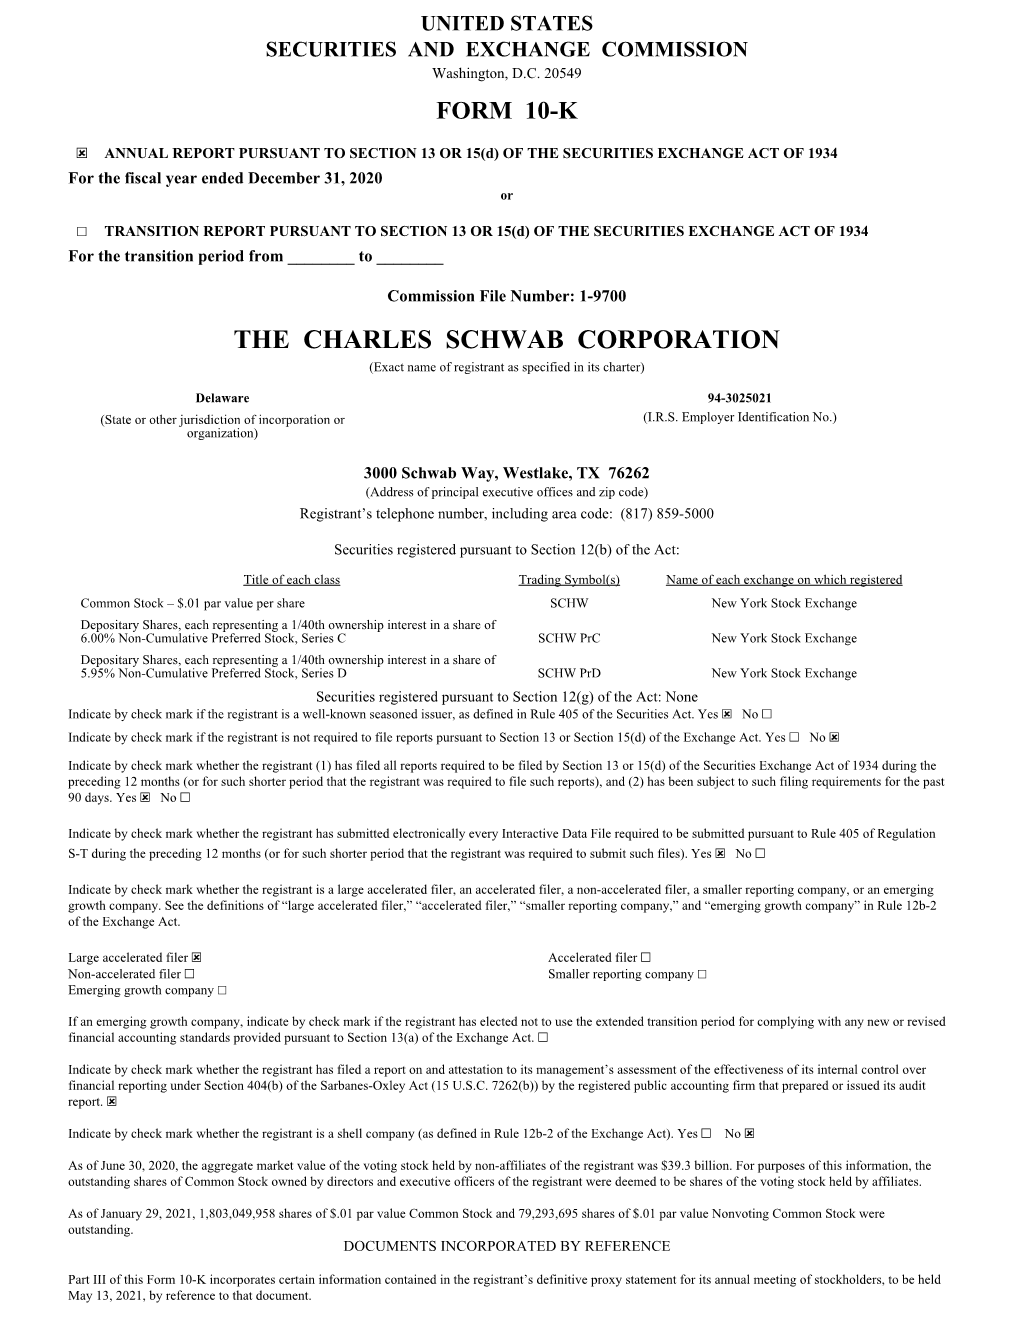 THE CHARLES SCHWAB CORPORATION (Exact Name of Registrant As Specified in Its Charter)